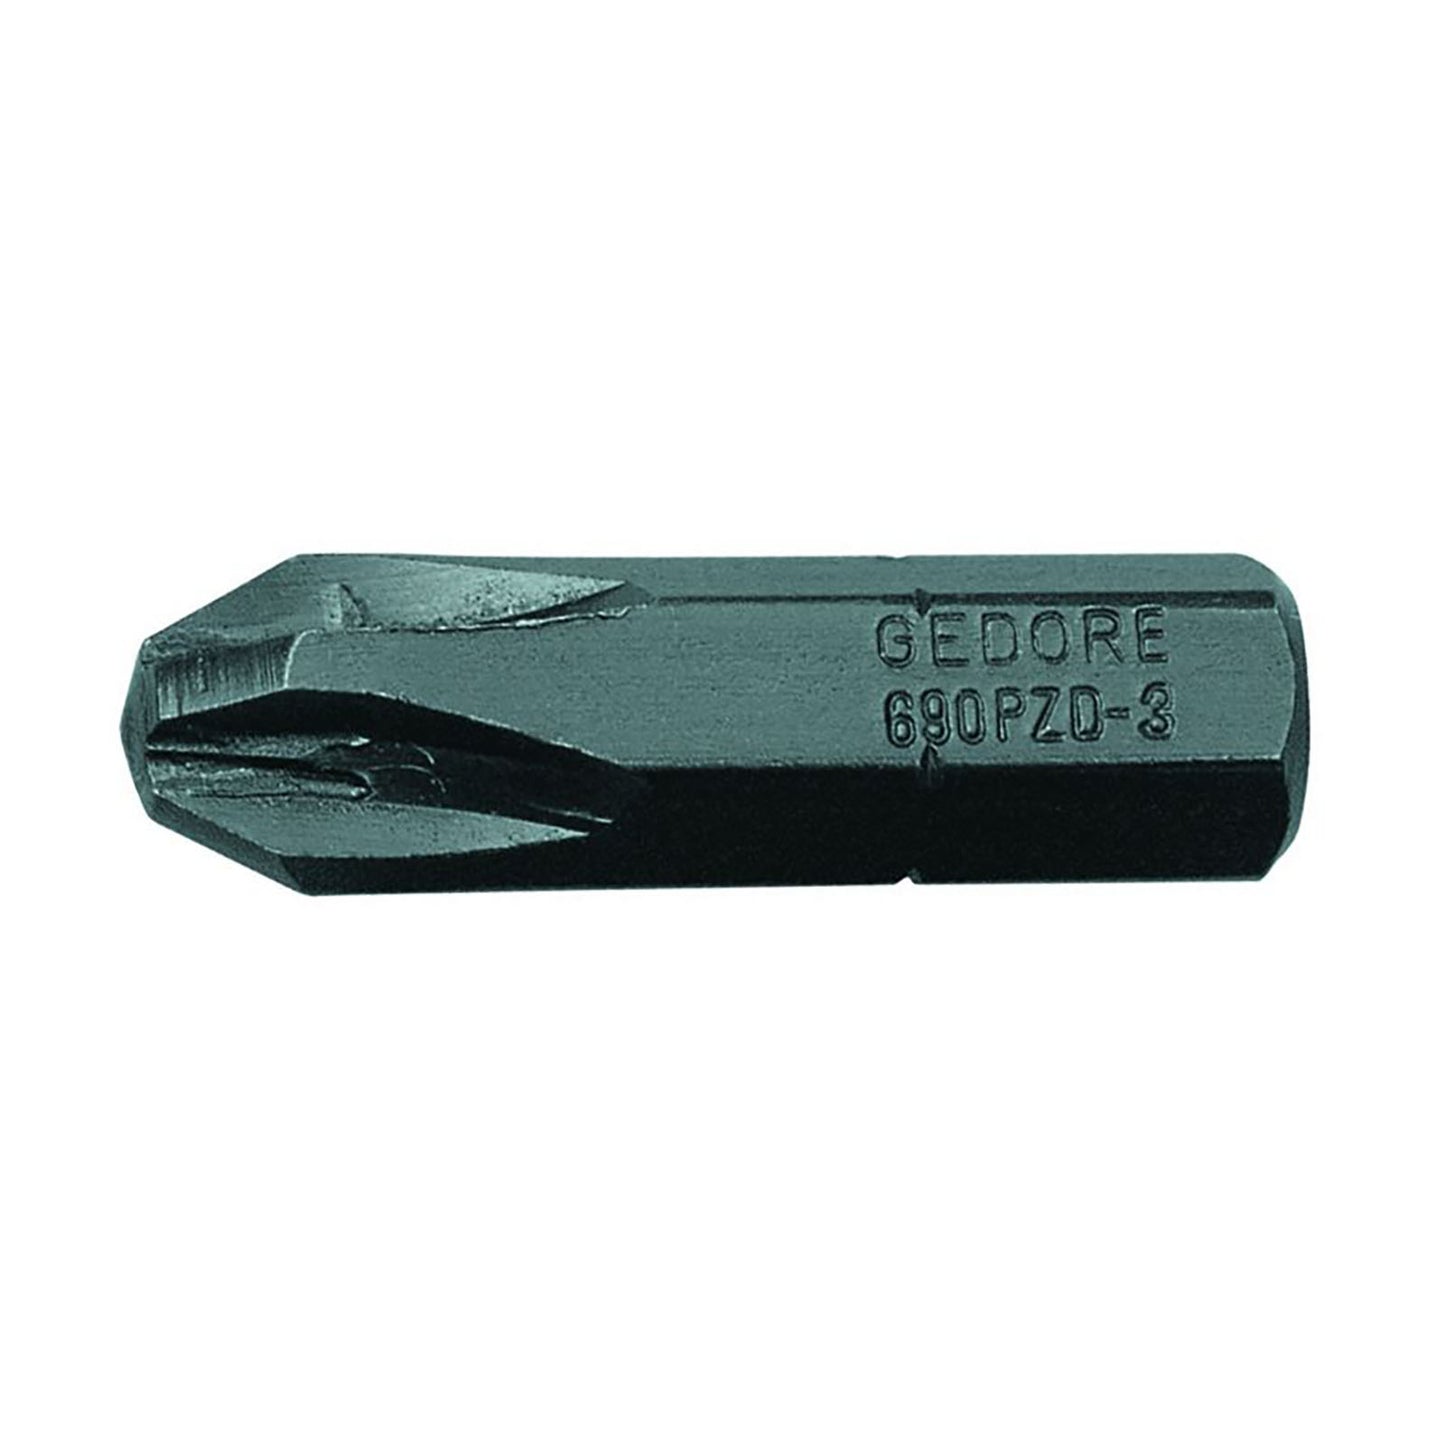 GEDORE 690 PZD 1 S-010 - Embout 1/4", PZ 1 (6552790)